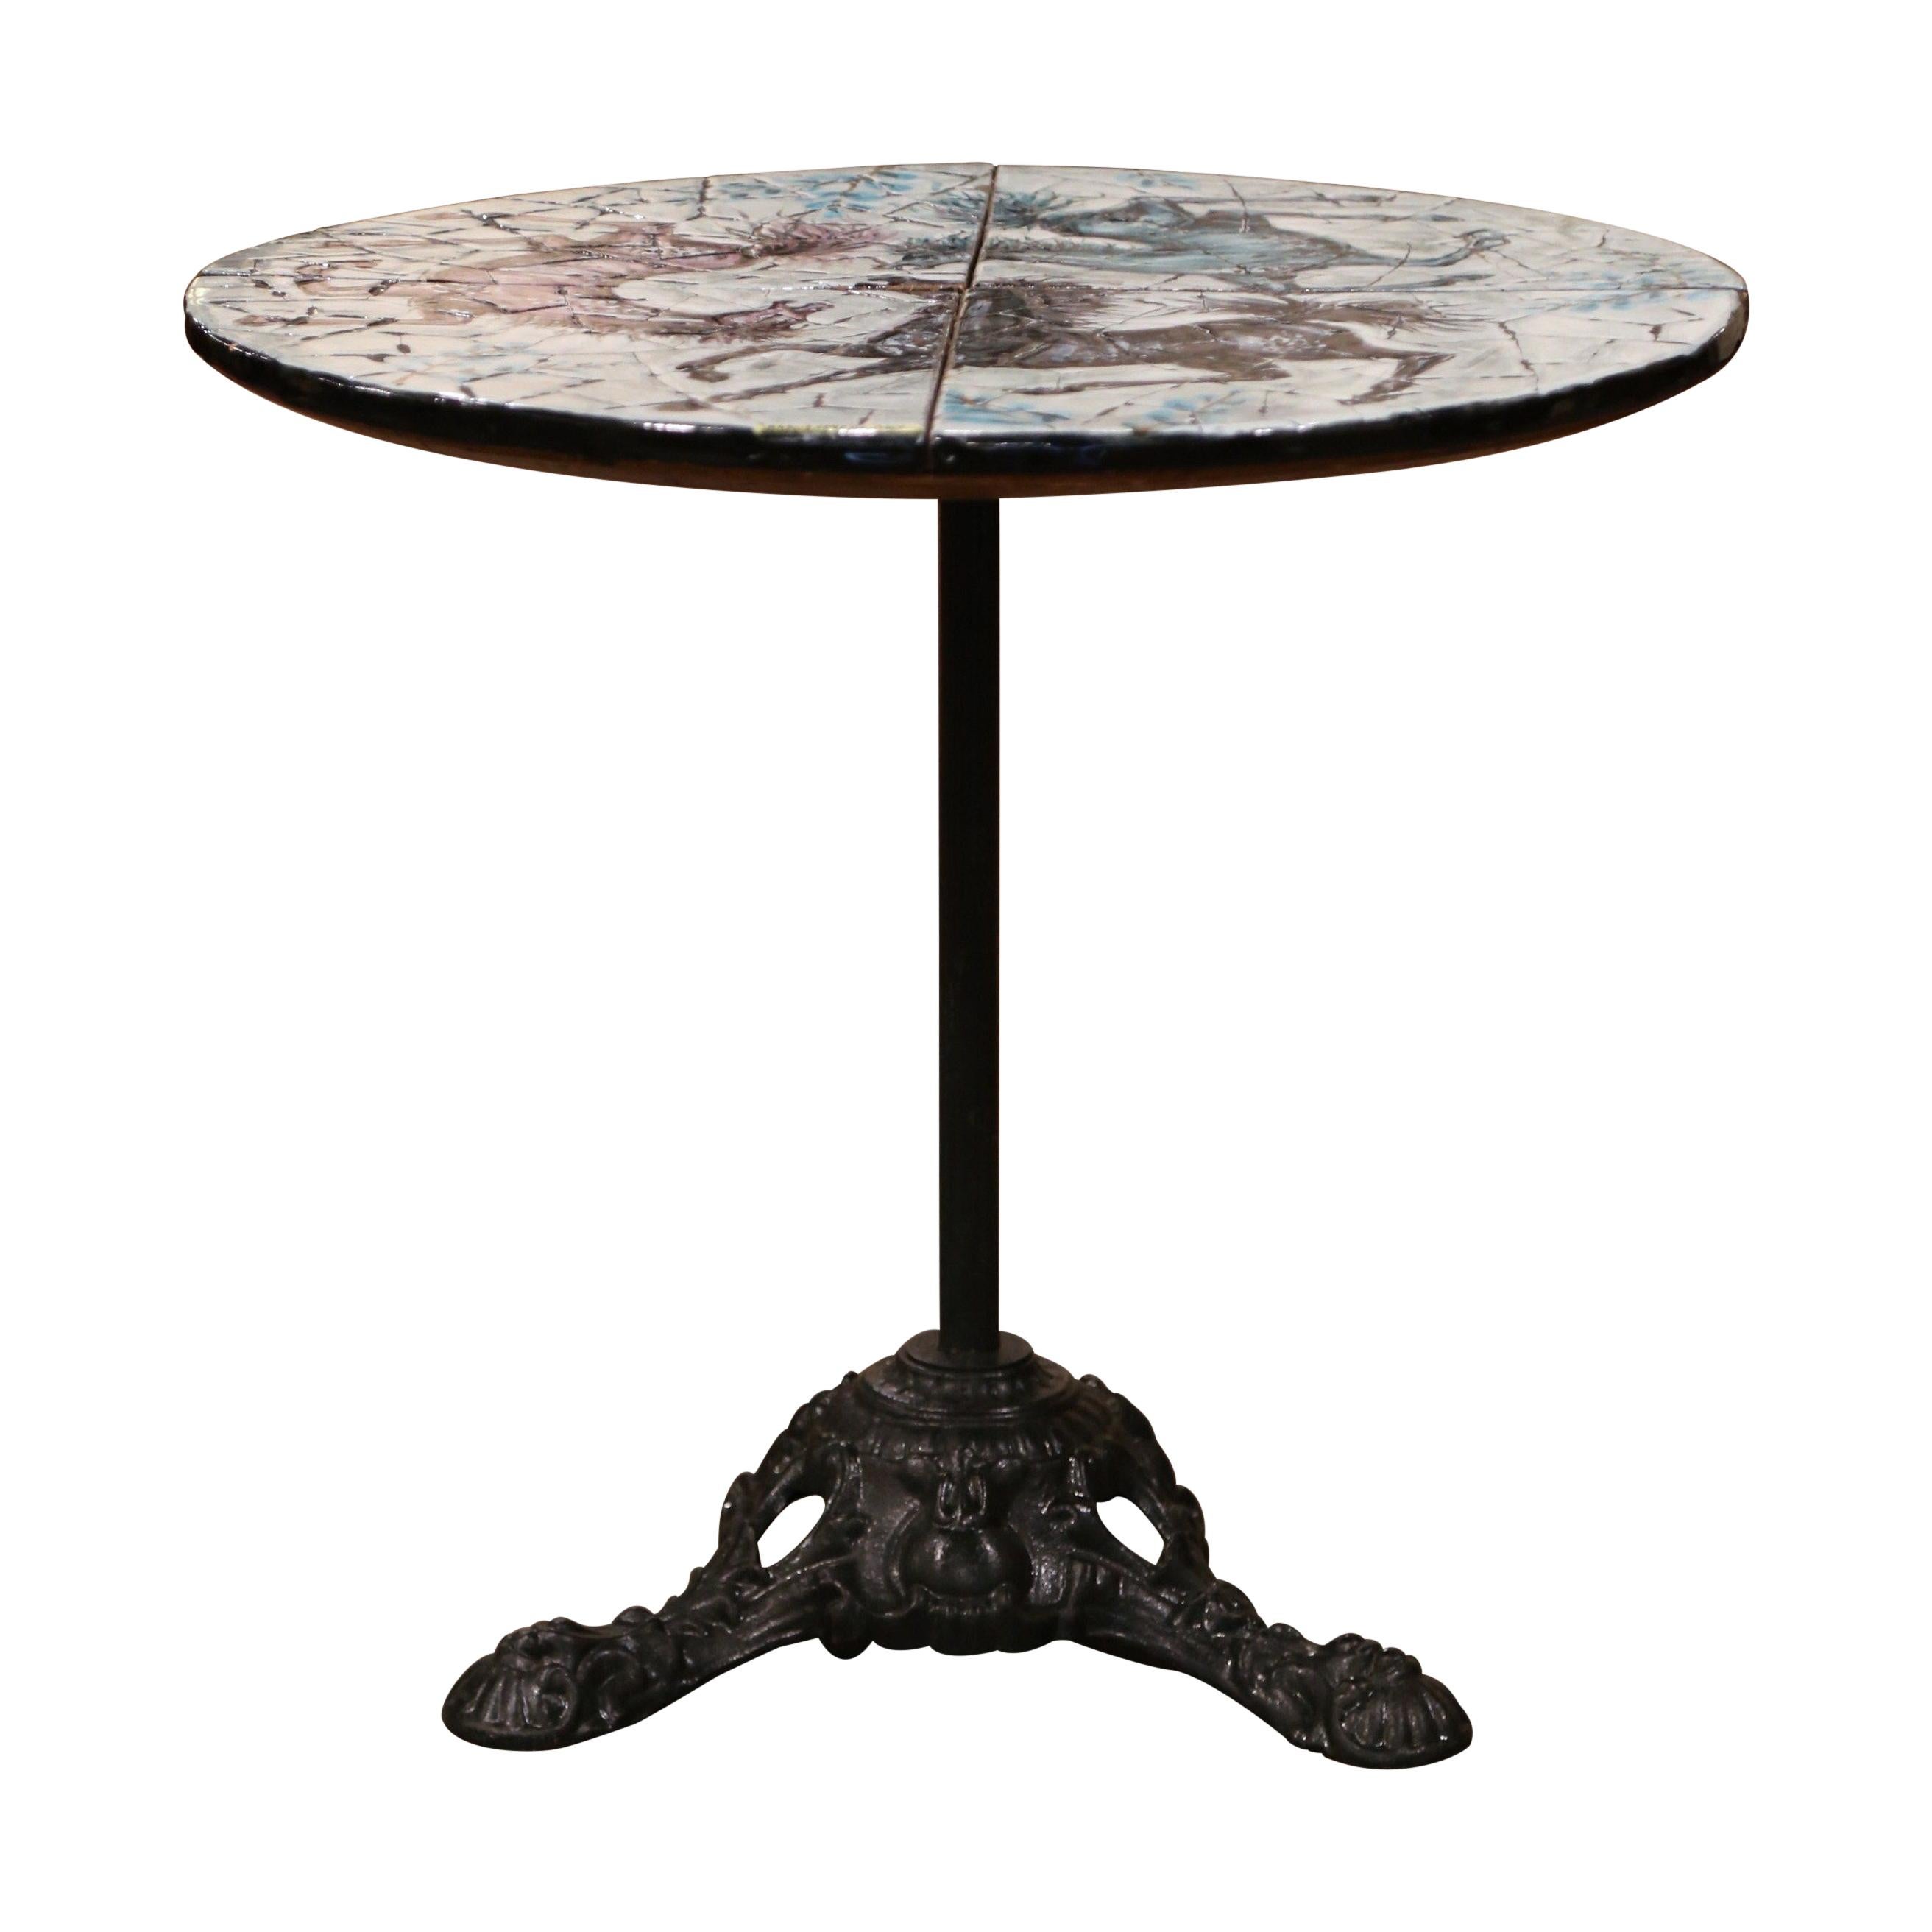 Mid-20th Century Italian Iron and Marble Pedestal Table with Mosaic Horse Motifs